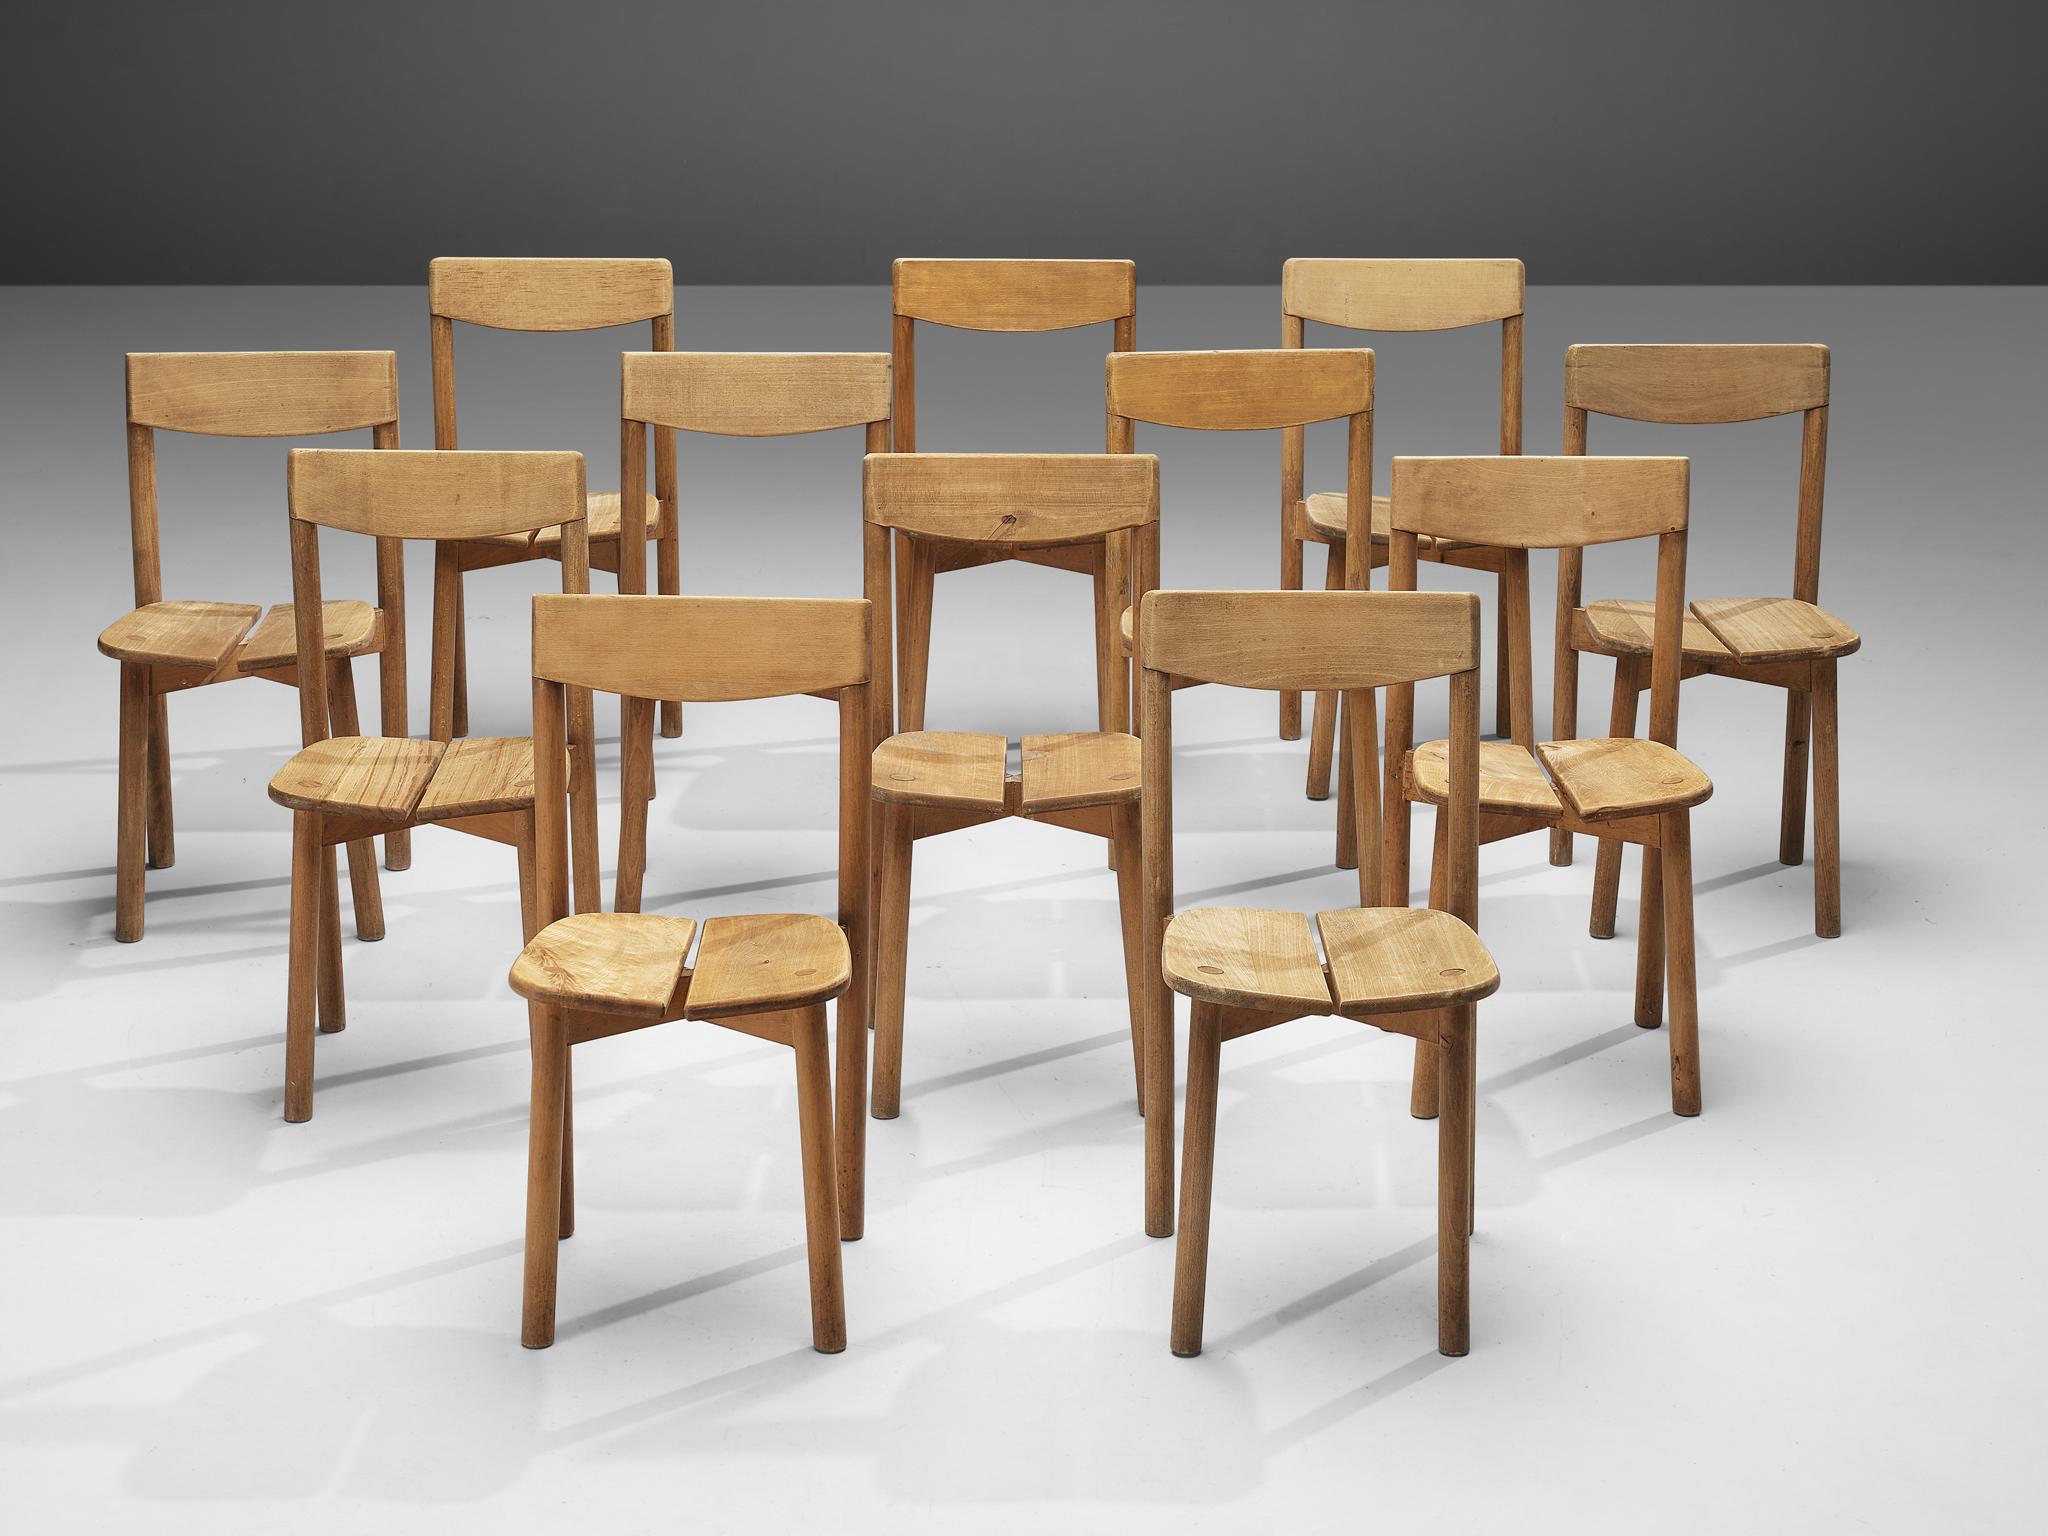 Pierre Gautier-Delaye, set of twelve dining chairs, beech, France, 1960s

This set of subtle and modest dining chairs are executed in stained beechwood. The seating area is divided into two organically shaped slats and is detailed with wood-joints